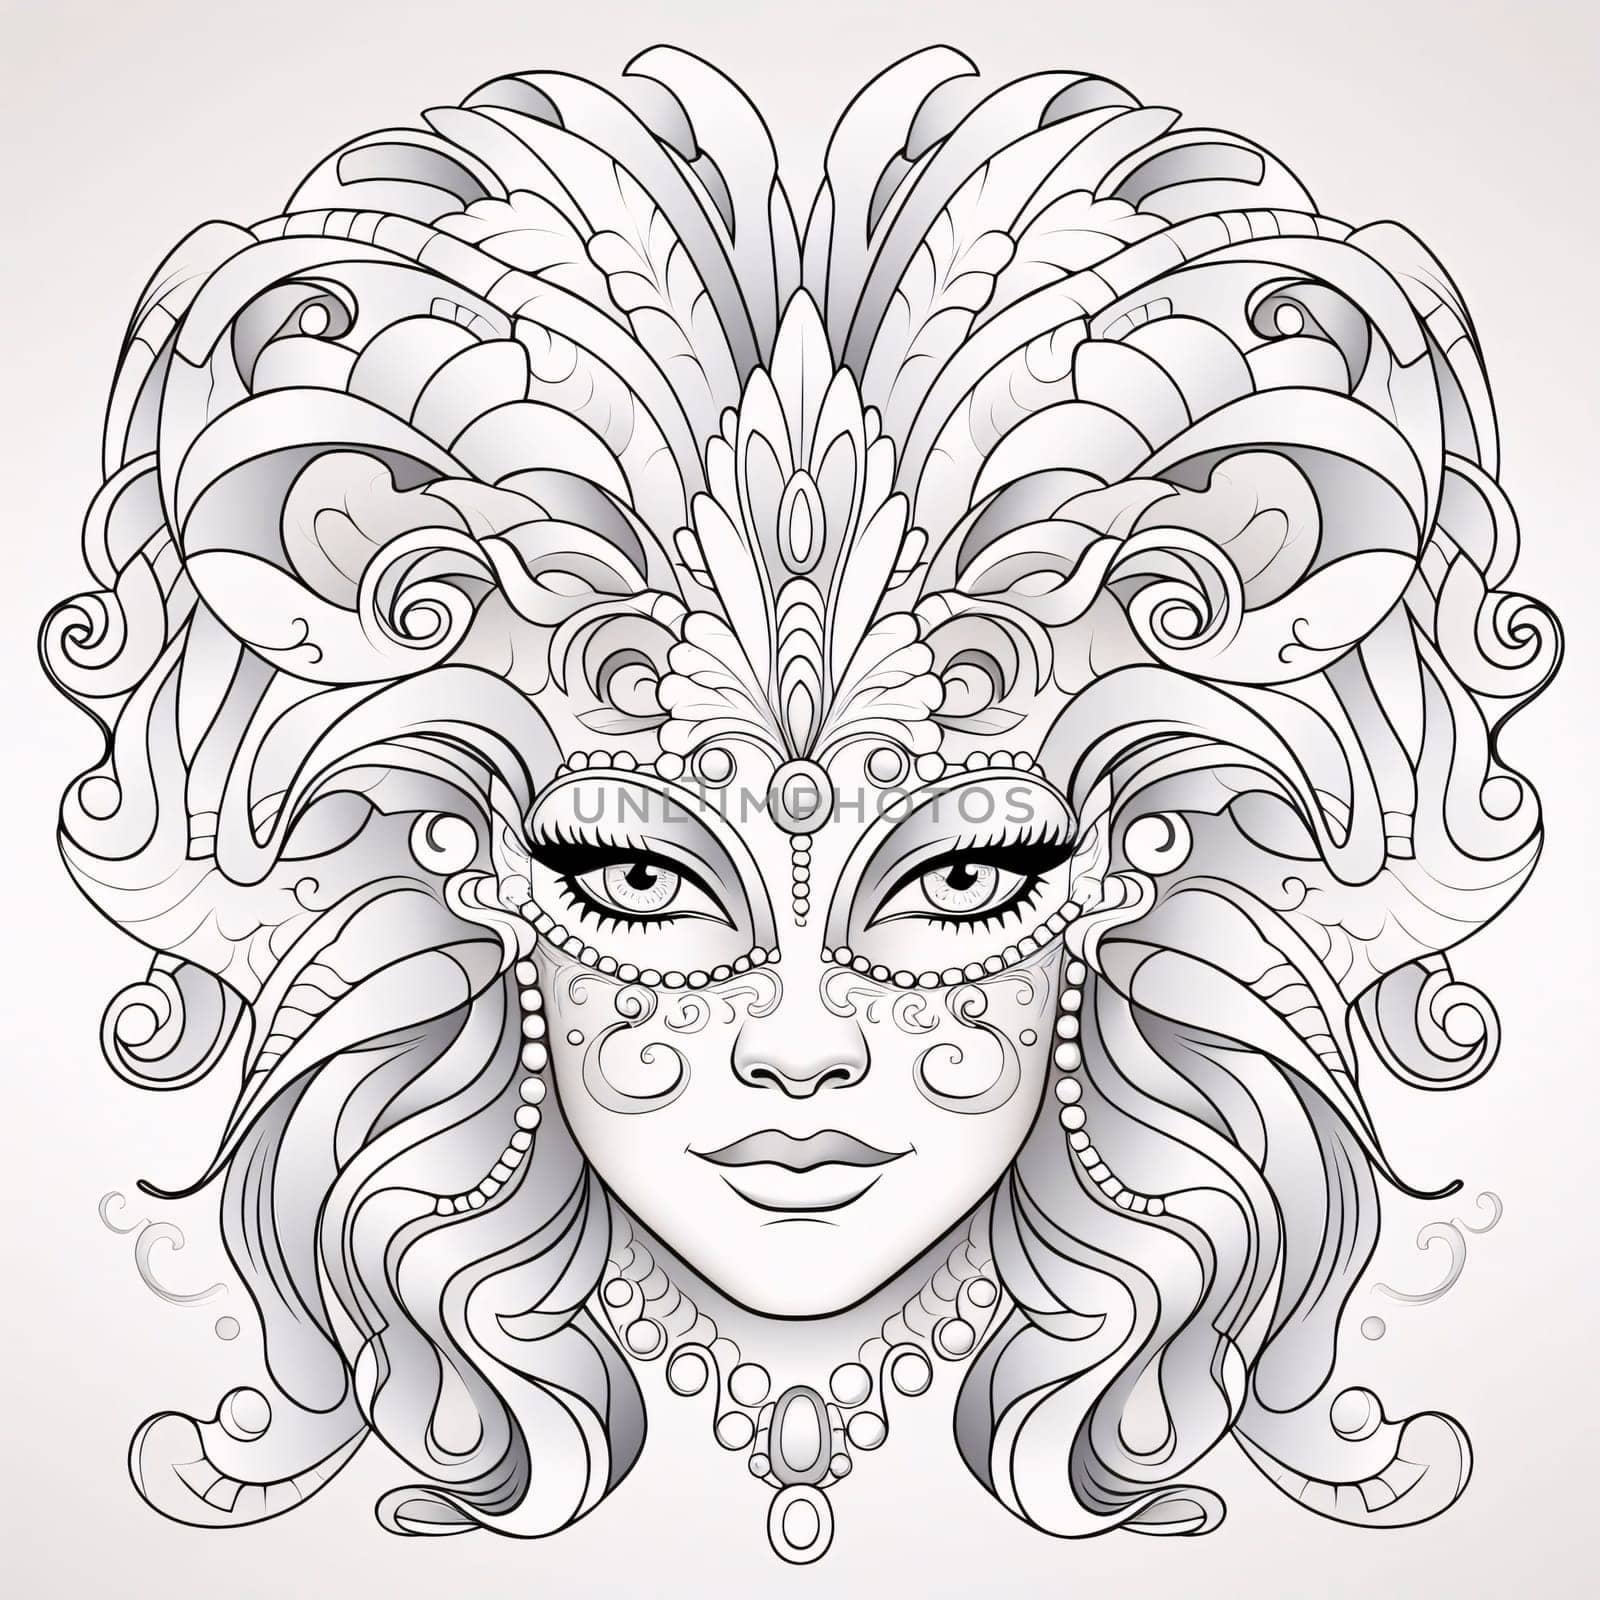 Black and white coloring sheet, carnival mask with decorations. Carnival outfits, masks and decorations. A time of fun and celebration before the fast.